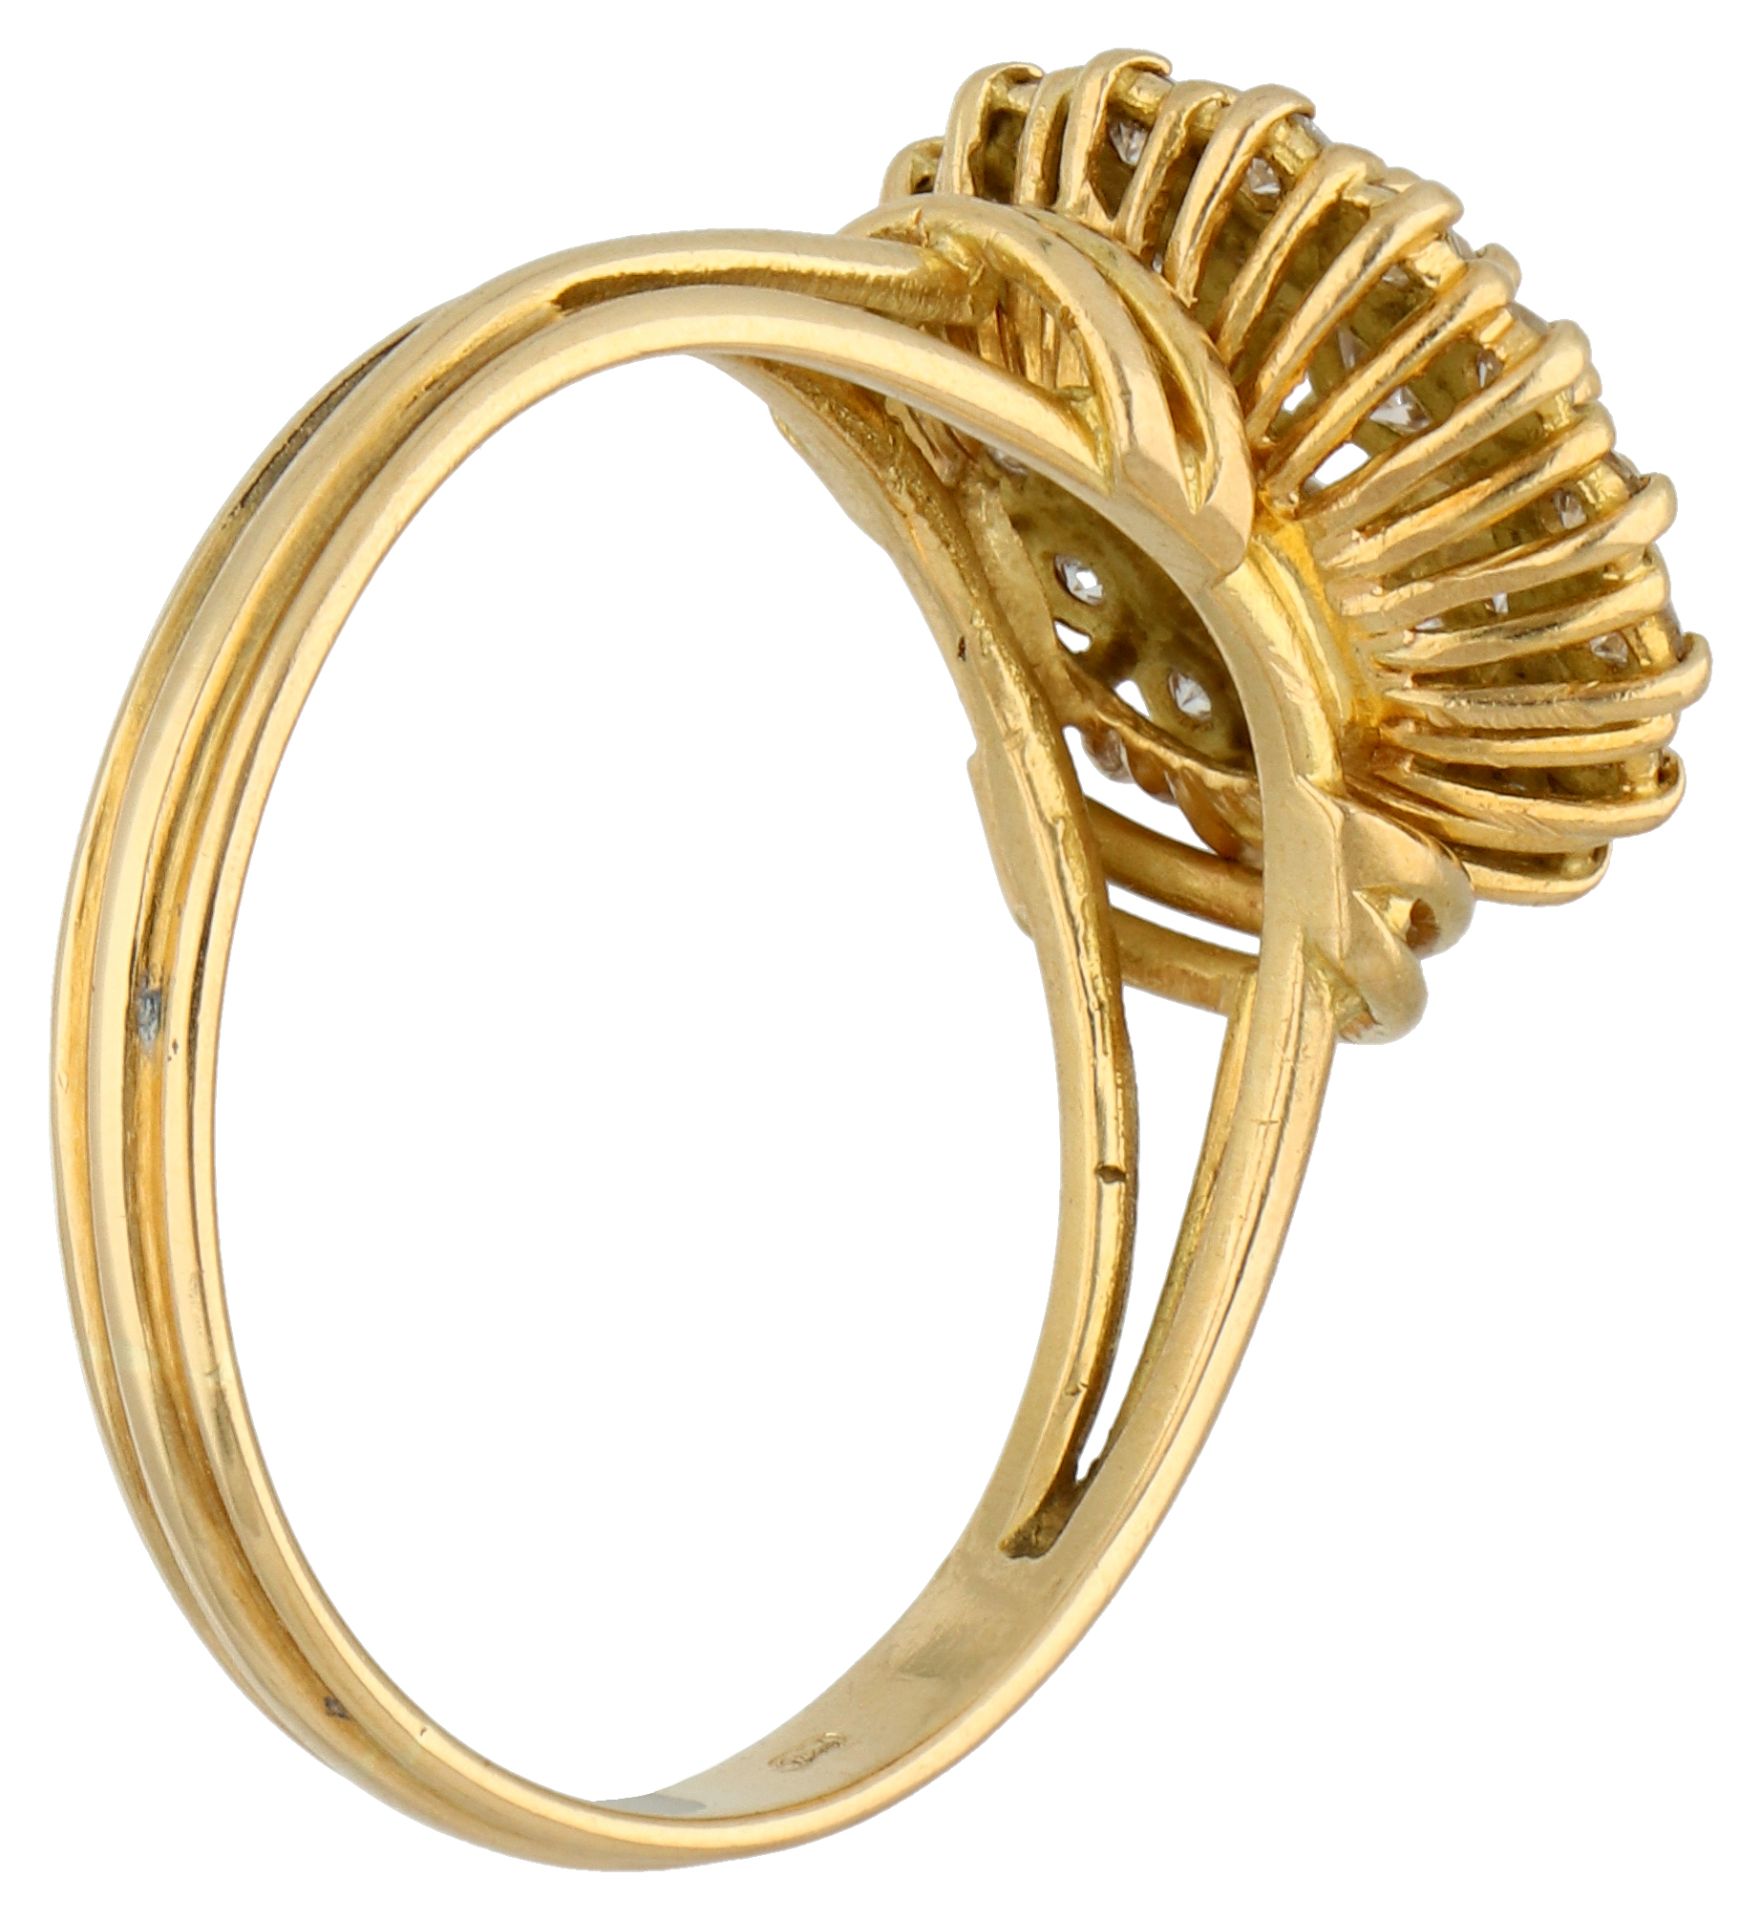 No reserve - 18K Yellow gold entourage ring set with approx. 0.79 ct. diamond. - Image 2 of 2